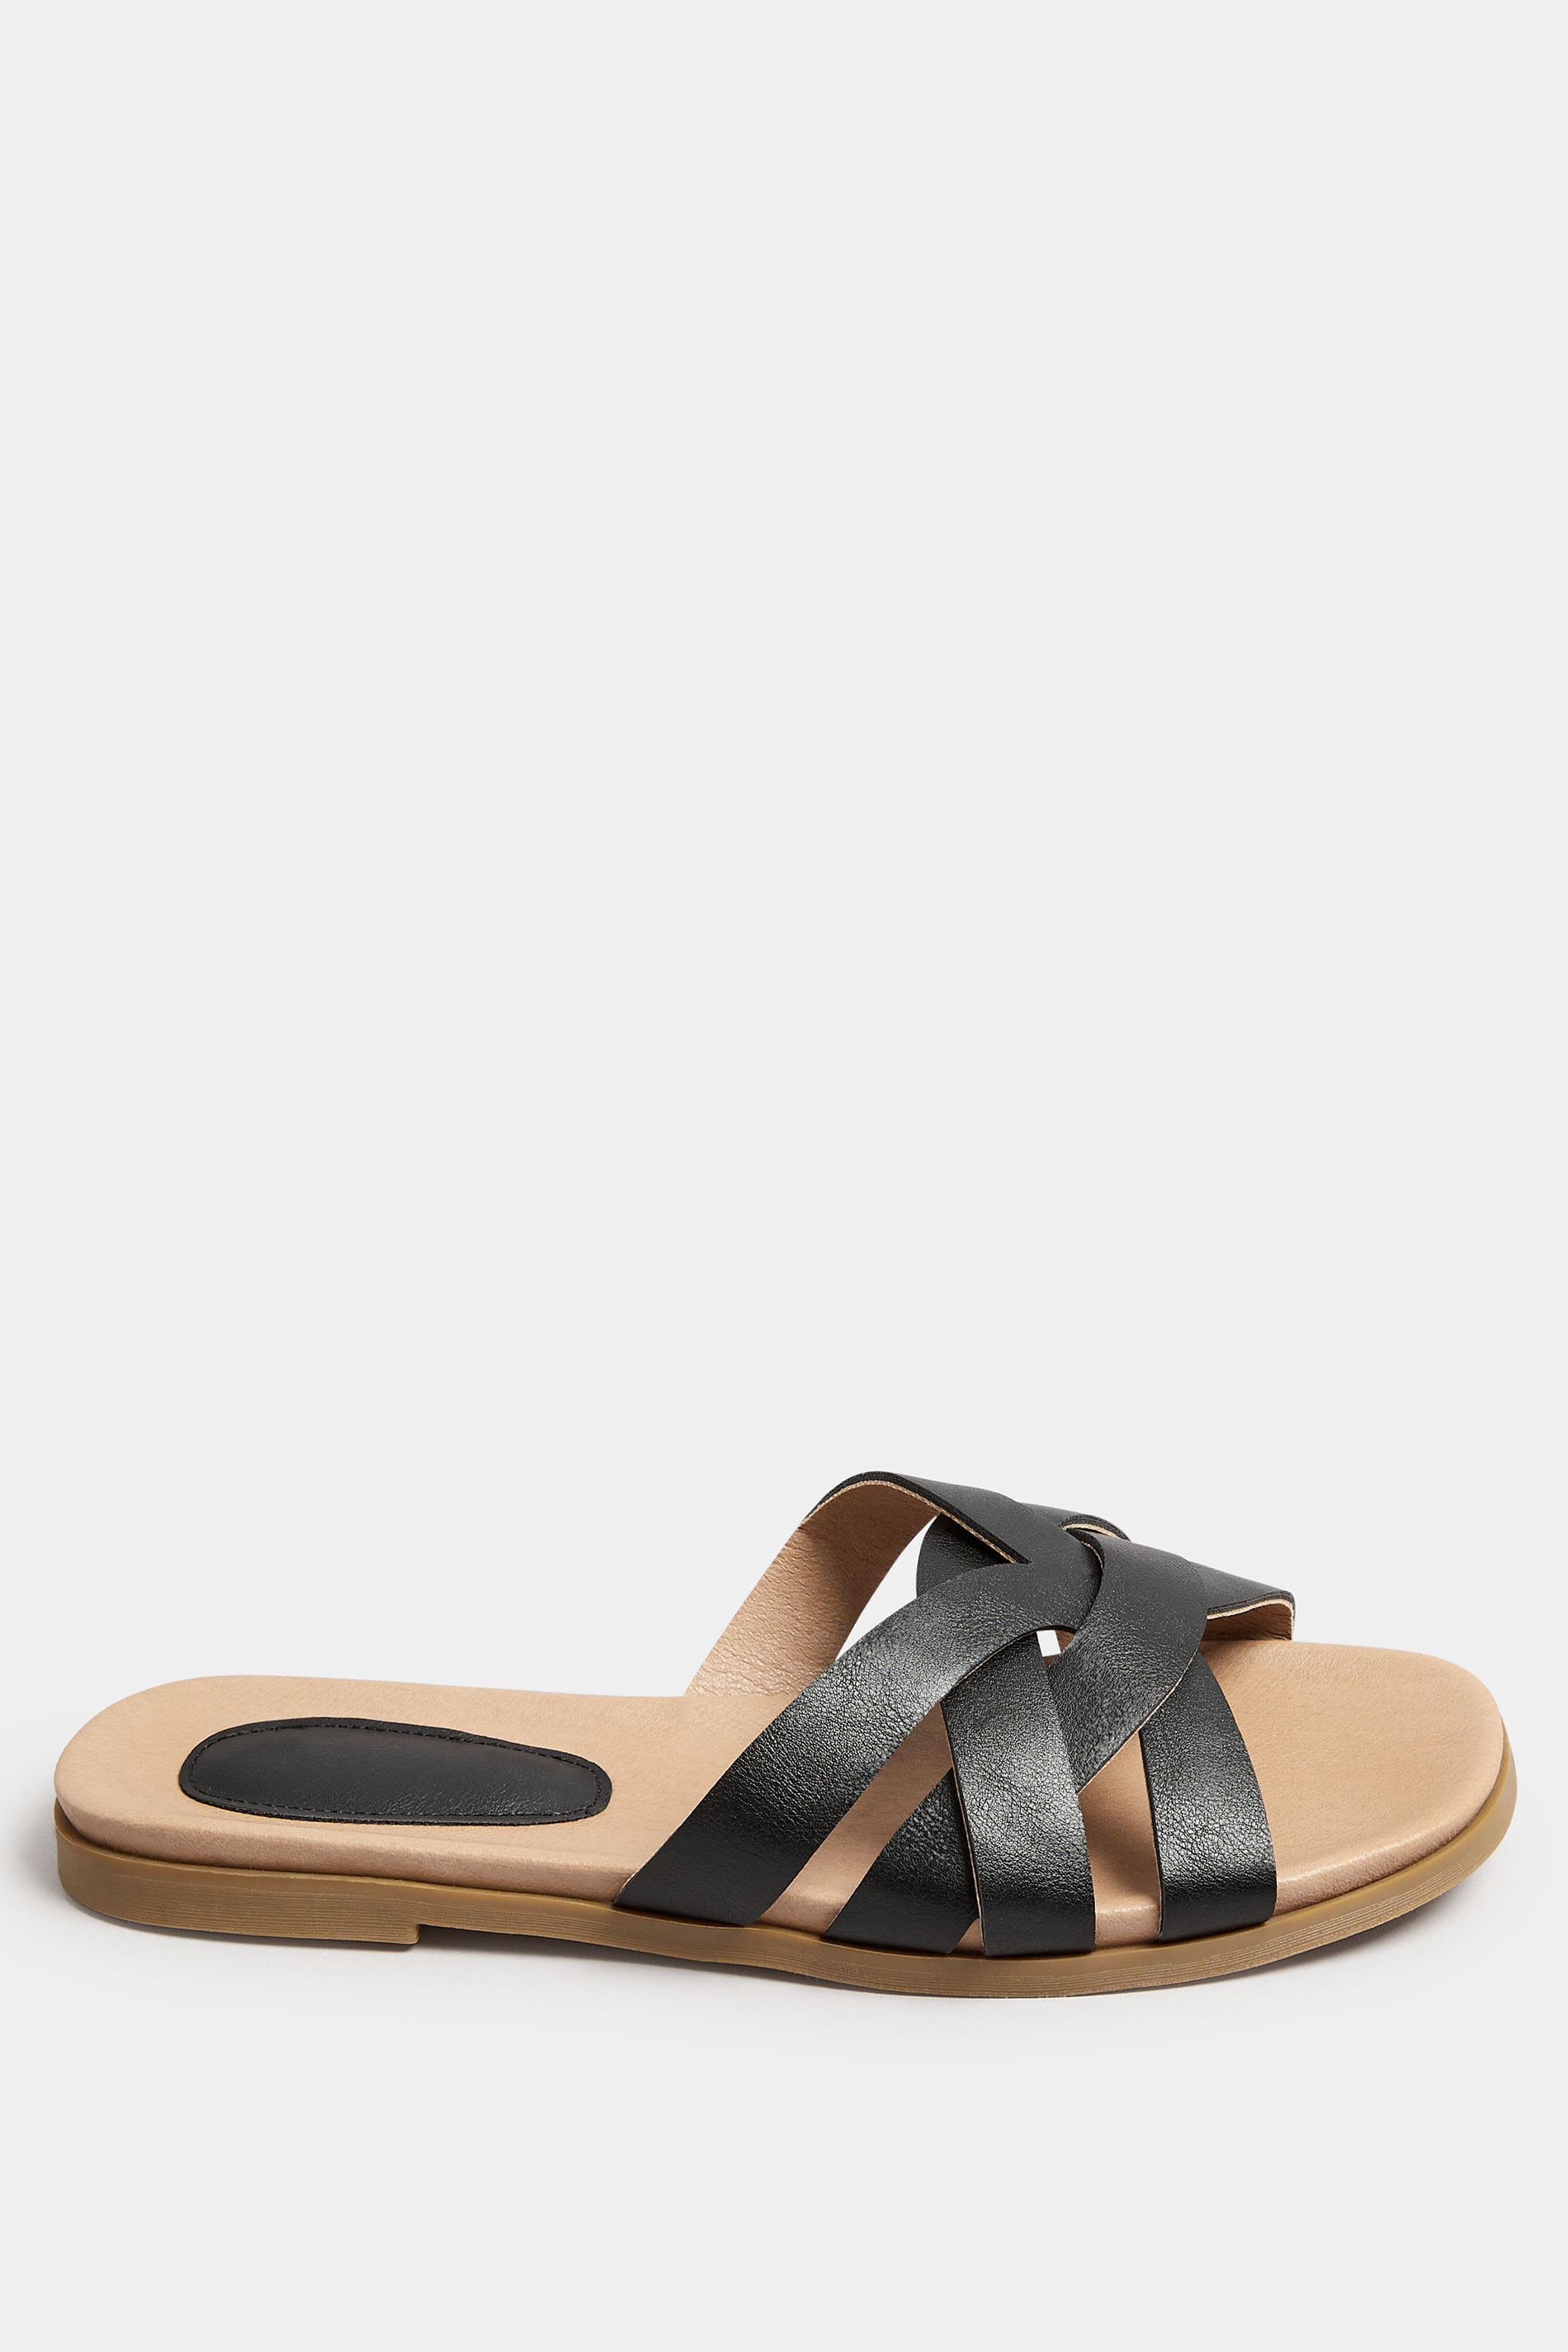 Black Woven Mule Sandals In Extra Wide EEE Fit | Yours Clothing 3